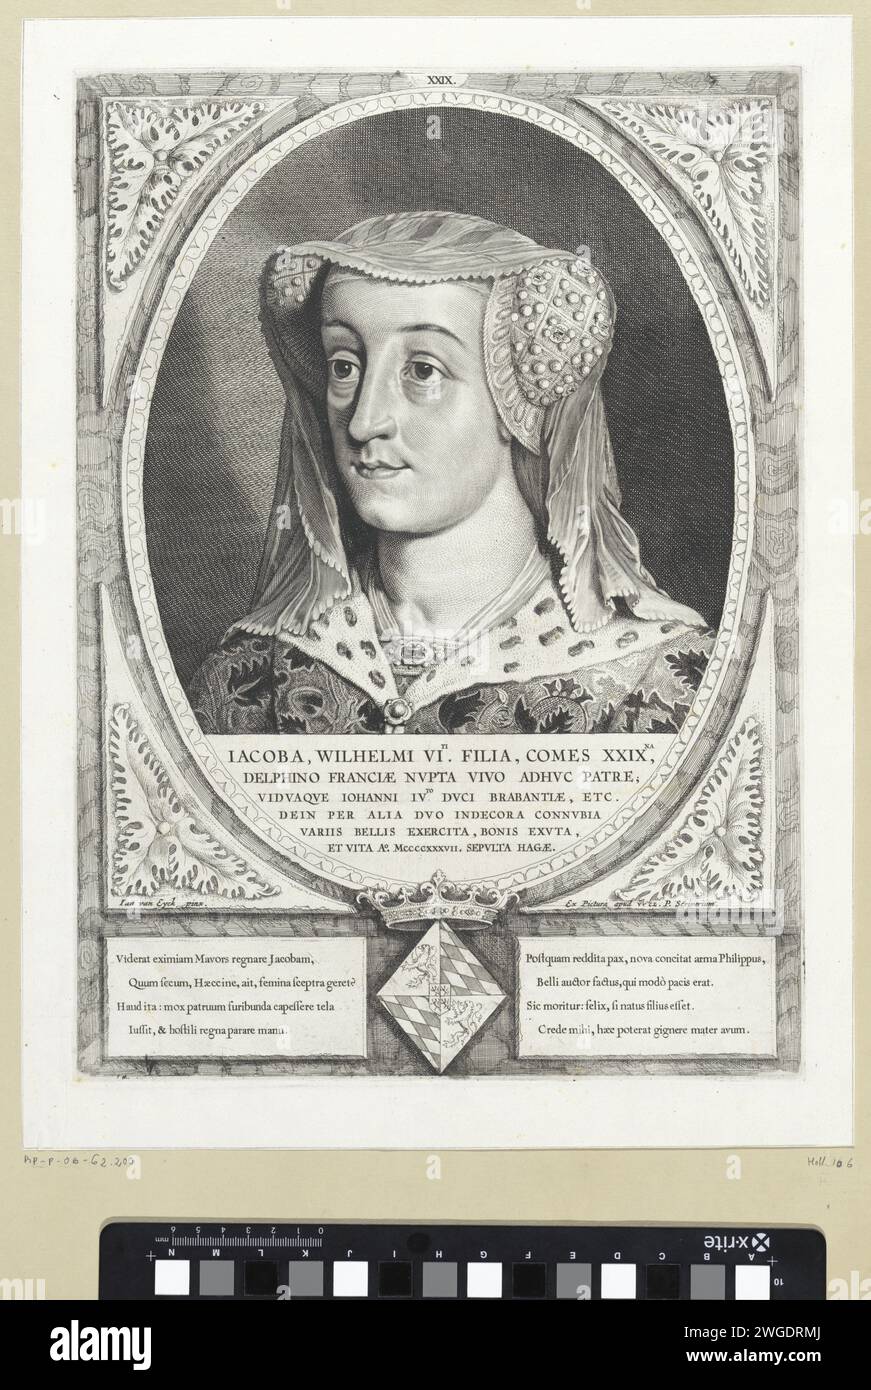 Portrait of Jacoba van Beieren, Cornelis Visscher (II), after Jan van Eyck, 1650 print Jacoba van Bavaria, Countess of Holland, Zeeland and Hainaut. She wears a veil and a headdress, decorated with pearls and precious stones. Print from a series of 38 prints with portraits in full of graves and engines of Holland. Haarlem paper engraving / etching nobility and patriciate; chivalry, knighthood Stock Photo